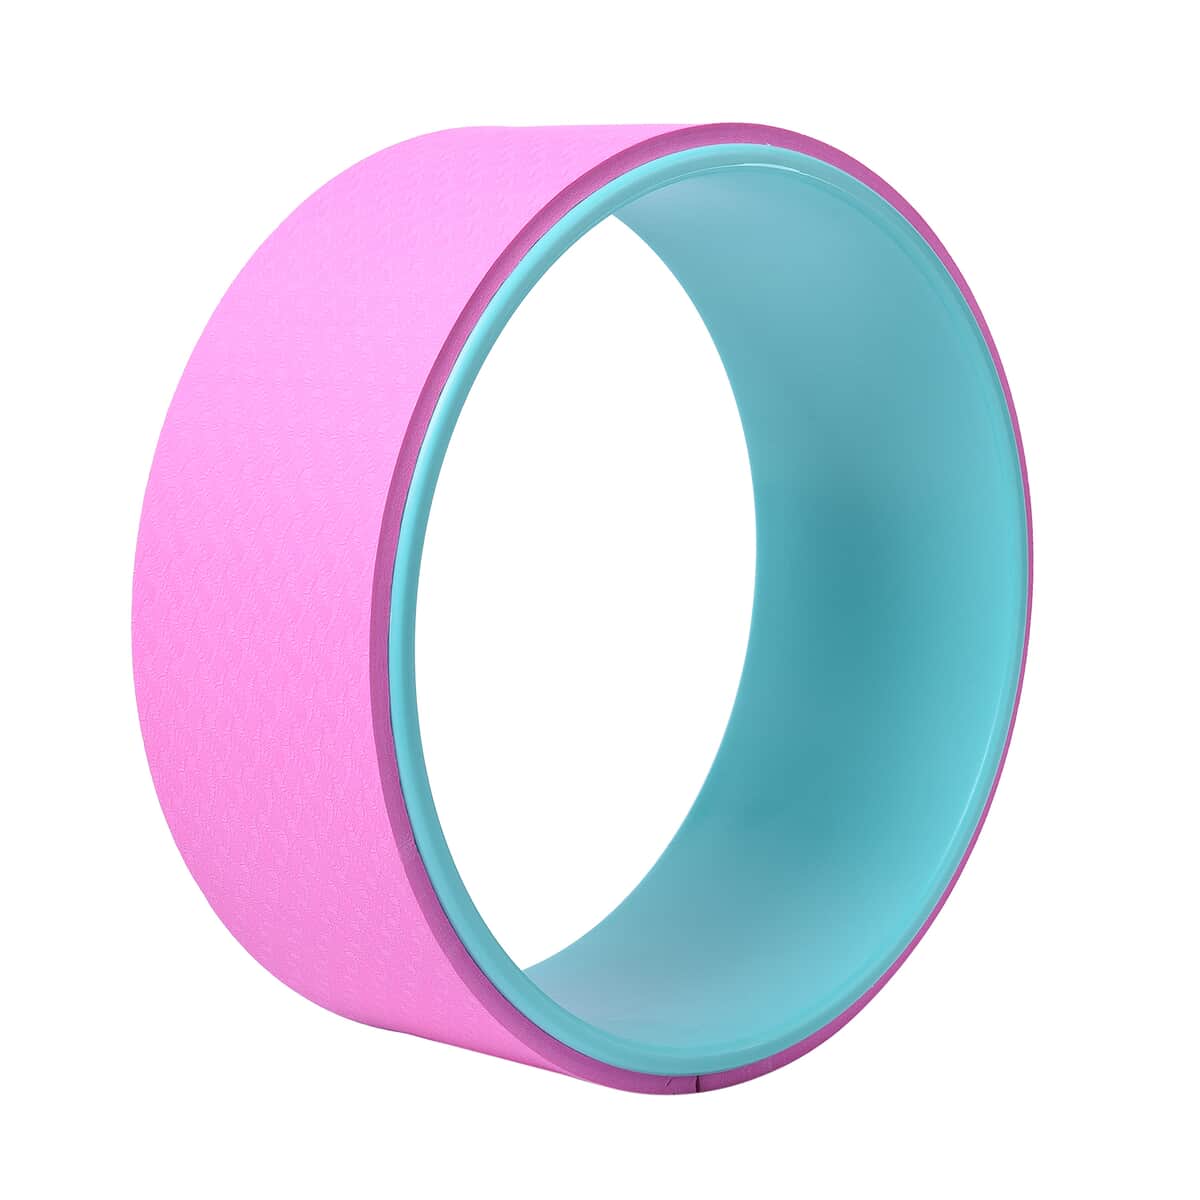 Pink Yoga Wheel for Flexibility, Stretching, Home Fitness, Balance Training (Bearing Up to 600 pounds) image number 0